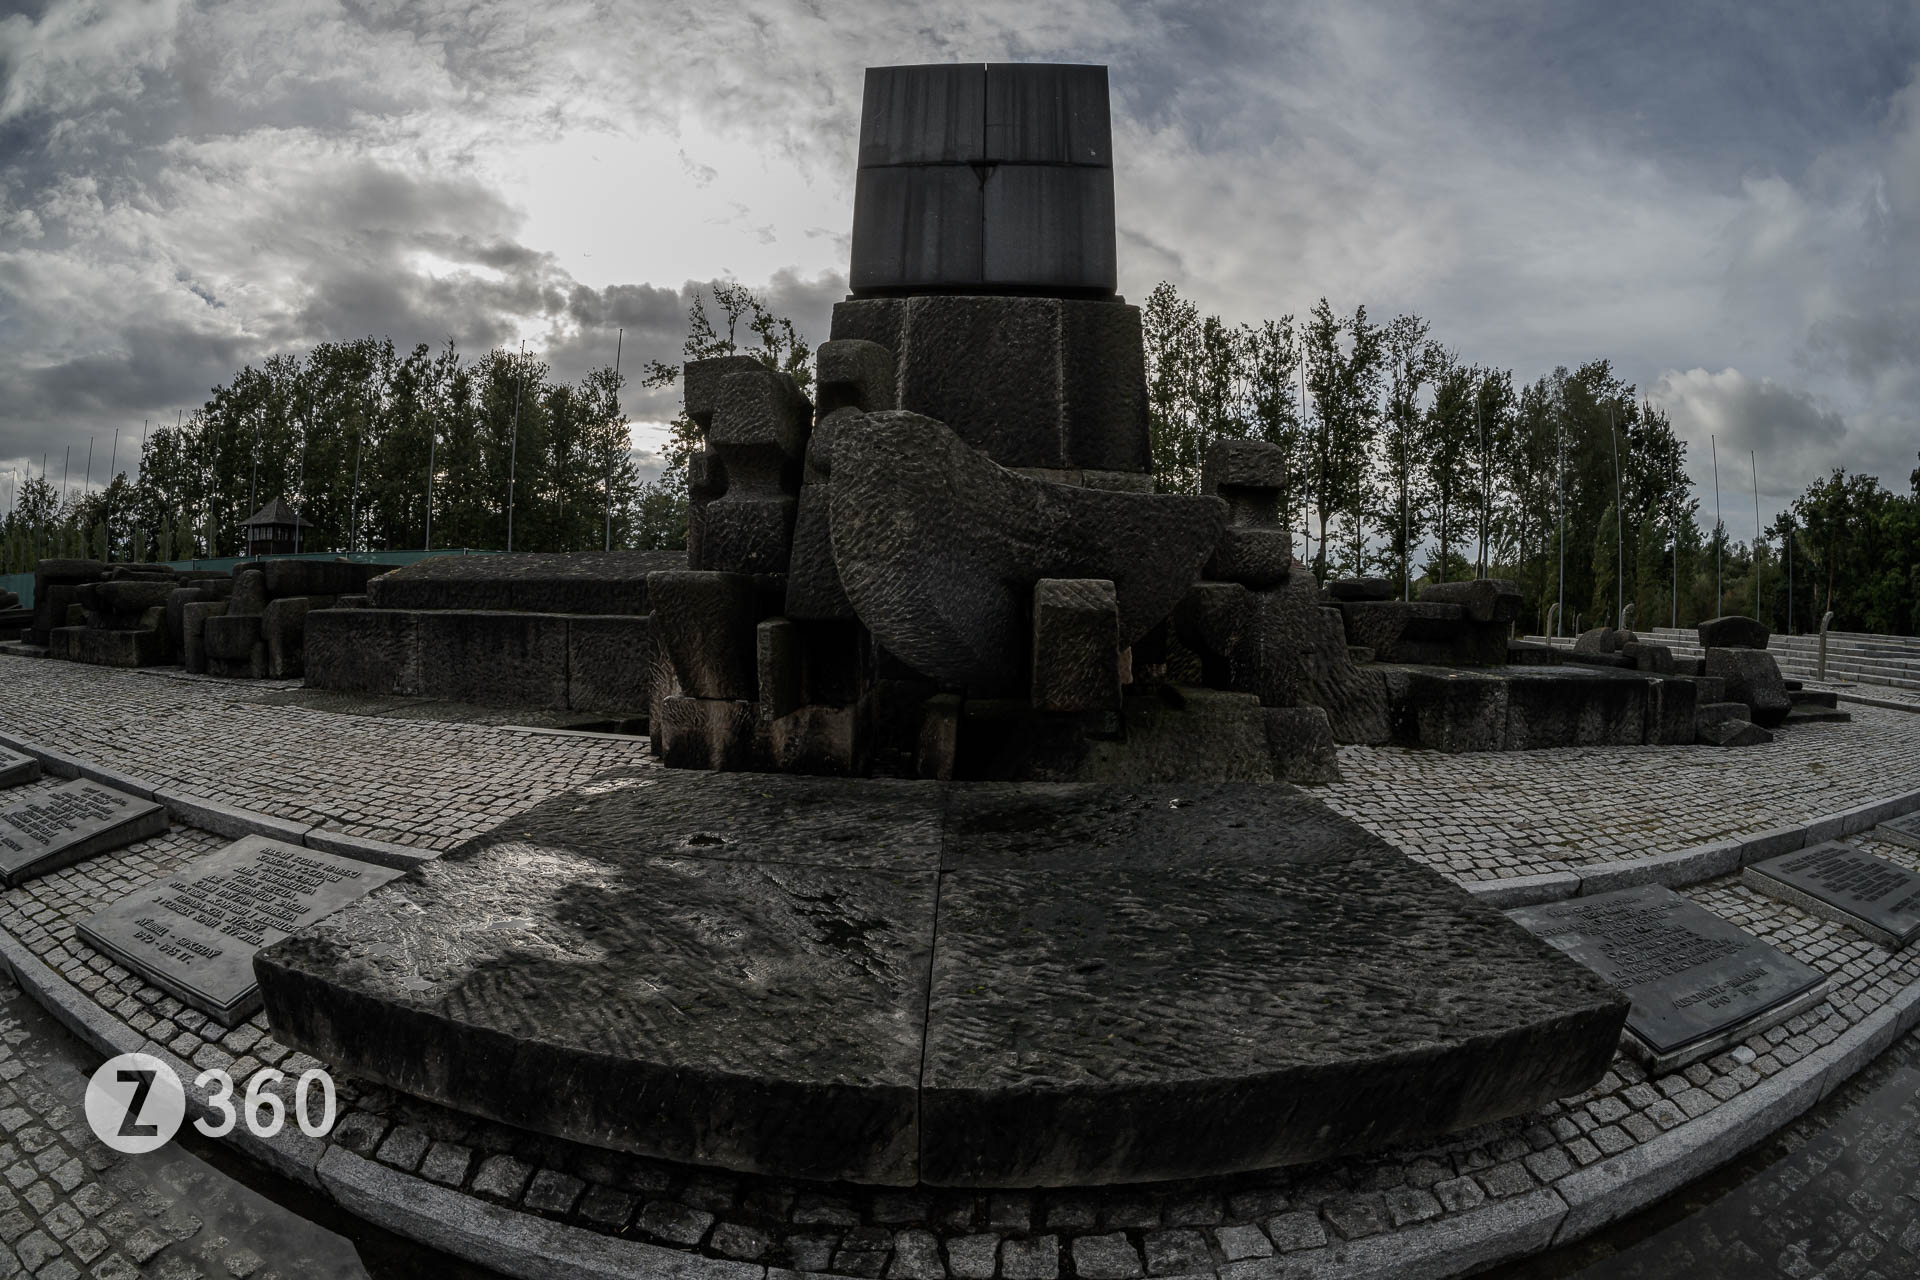 International Monument for the Victims of Fascism